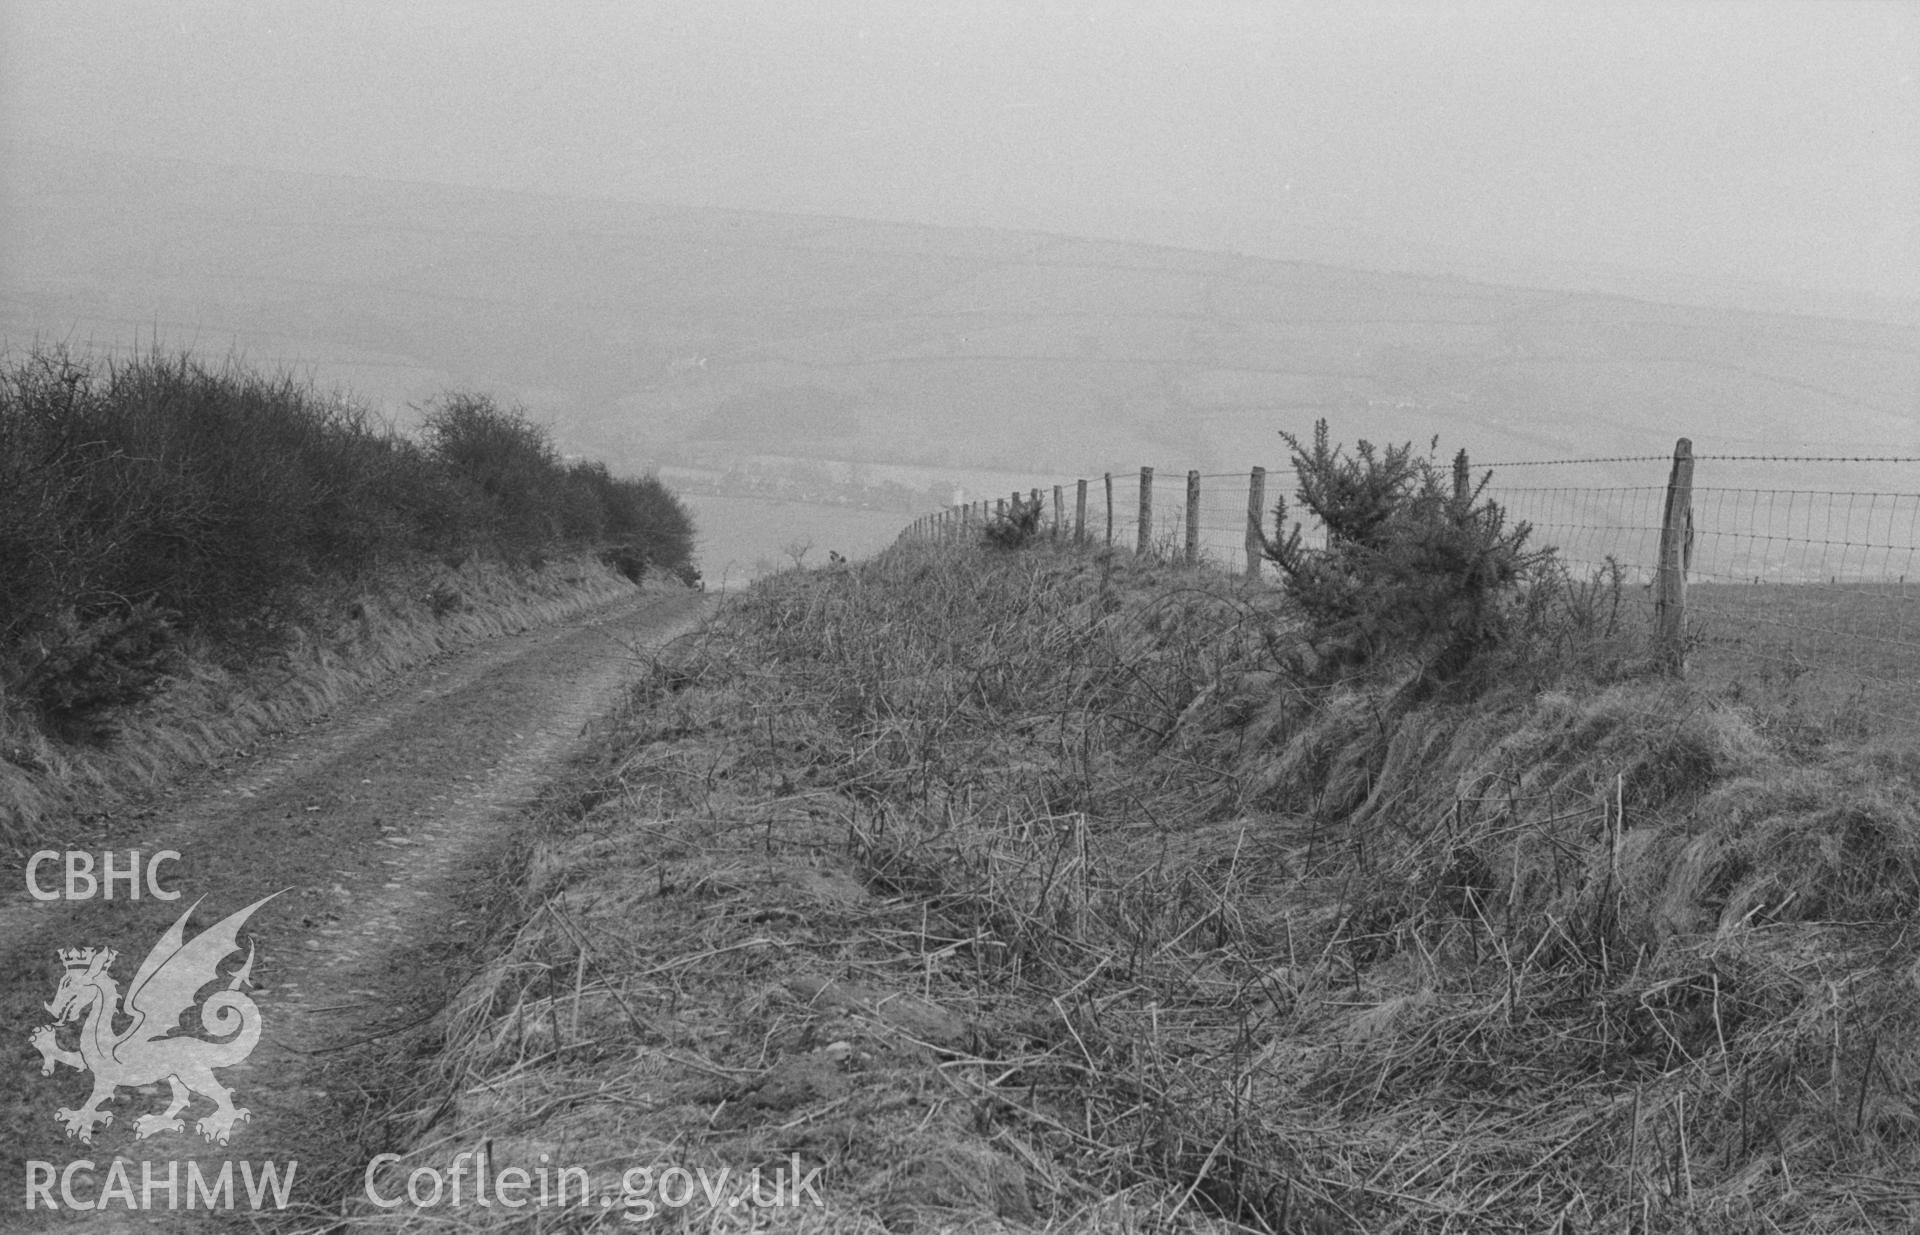 Digital copy of black & white negative showing view down straight, broad track (from Ty'n-Rhos to Cwrt) from the top of the ridge east of Hen Gaer, Penrhyncoch. Photographed in April 1963 by Arthur O. Chater from Grid Ref SN 640 850, looking south east.